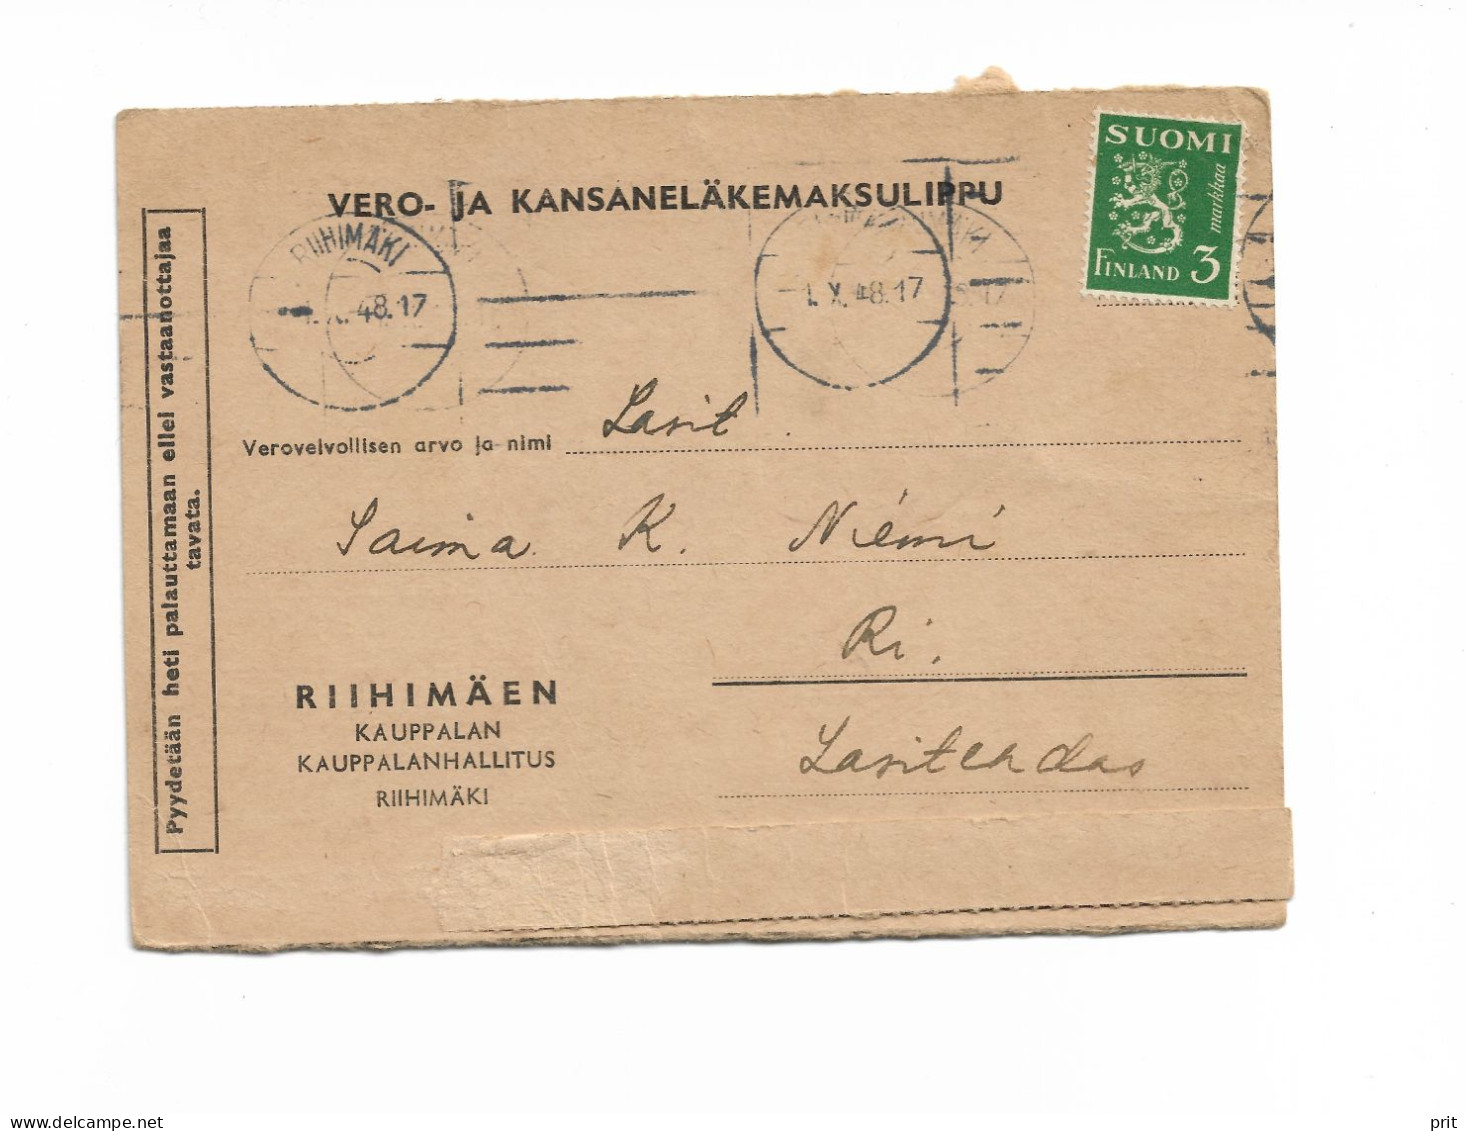 Tax & National Pension Payment Ticket 1948 Posted In Riihimäki Finland - Covers & Documents